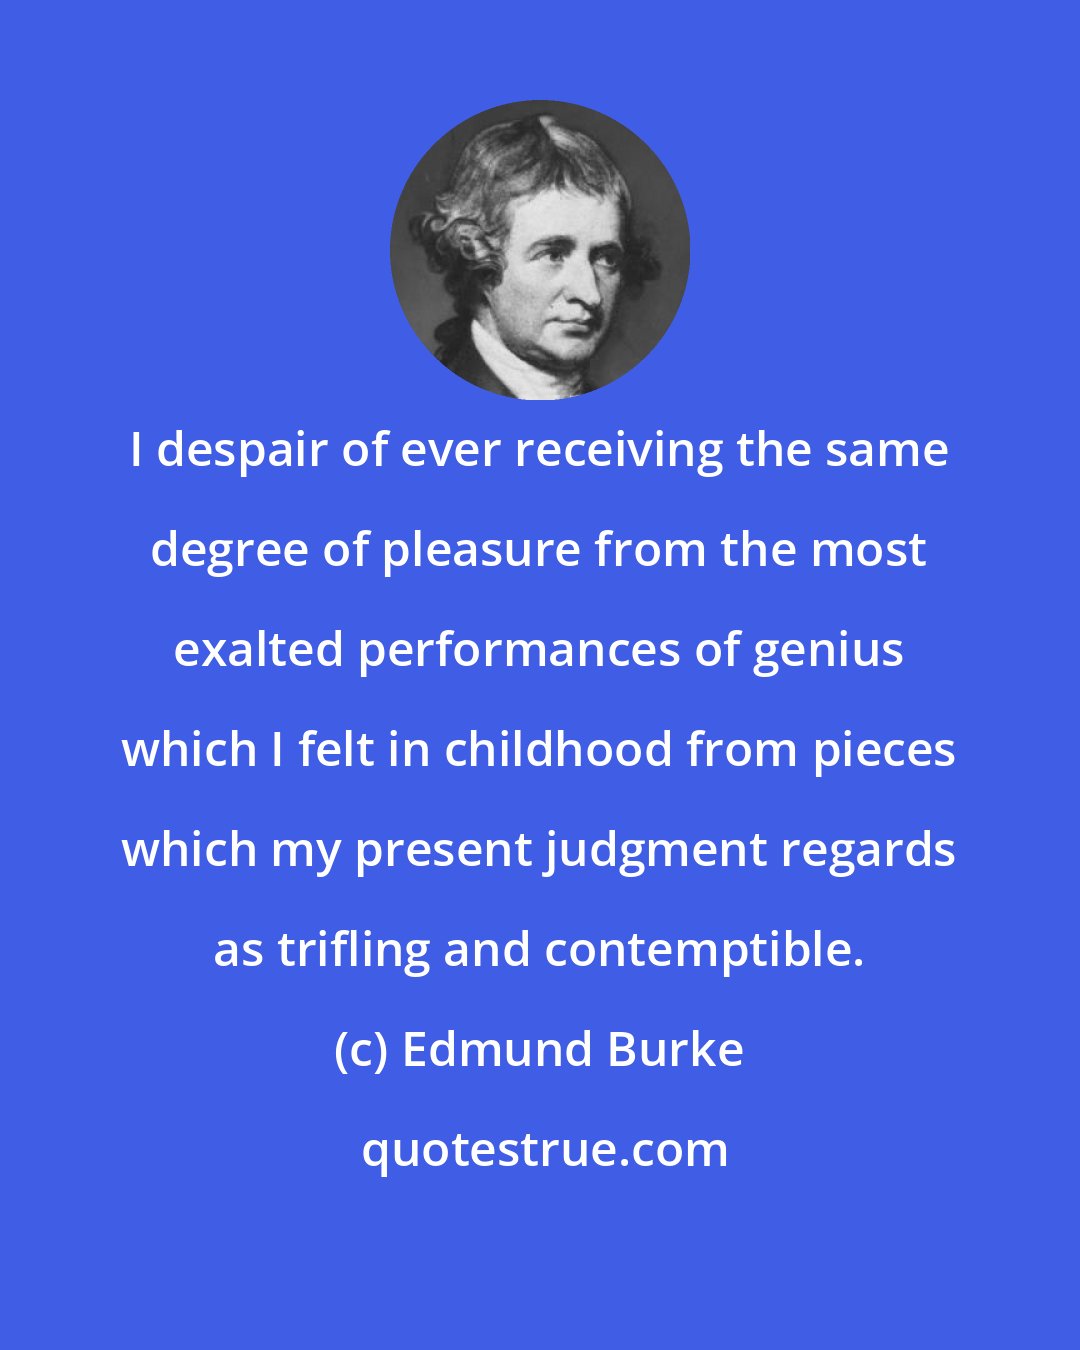 Edmund Burke: I despair of ever receiving the same degree of pleasure from the most exalted performances of genius which I felt in childhood from pieces which my present judgment regards as trifling and contemptible.